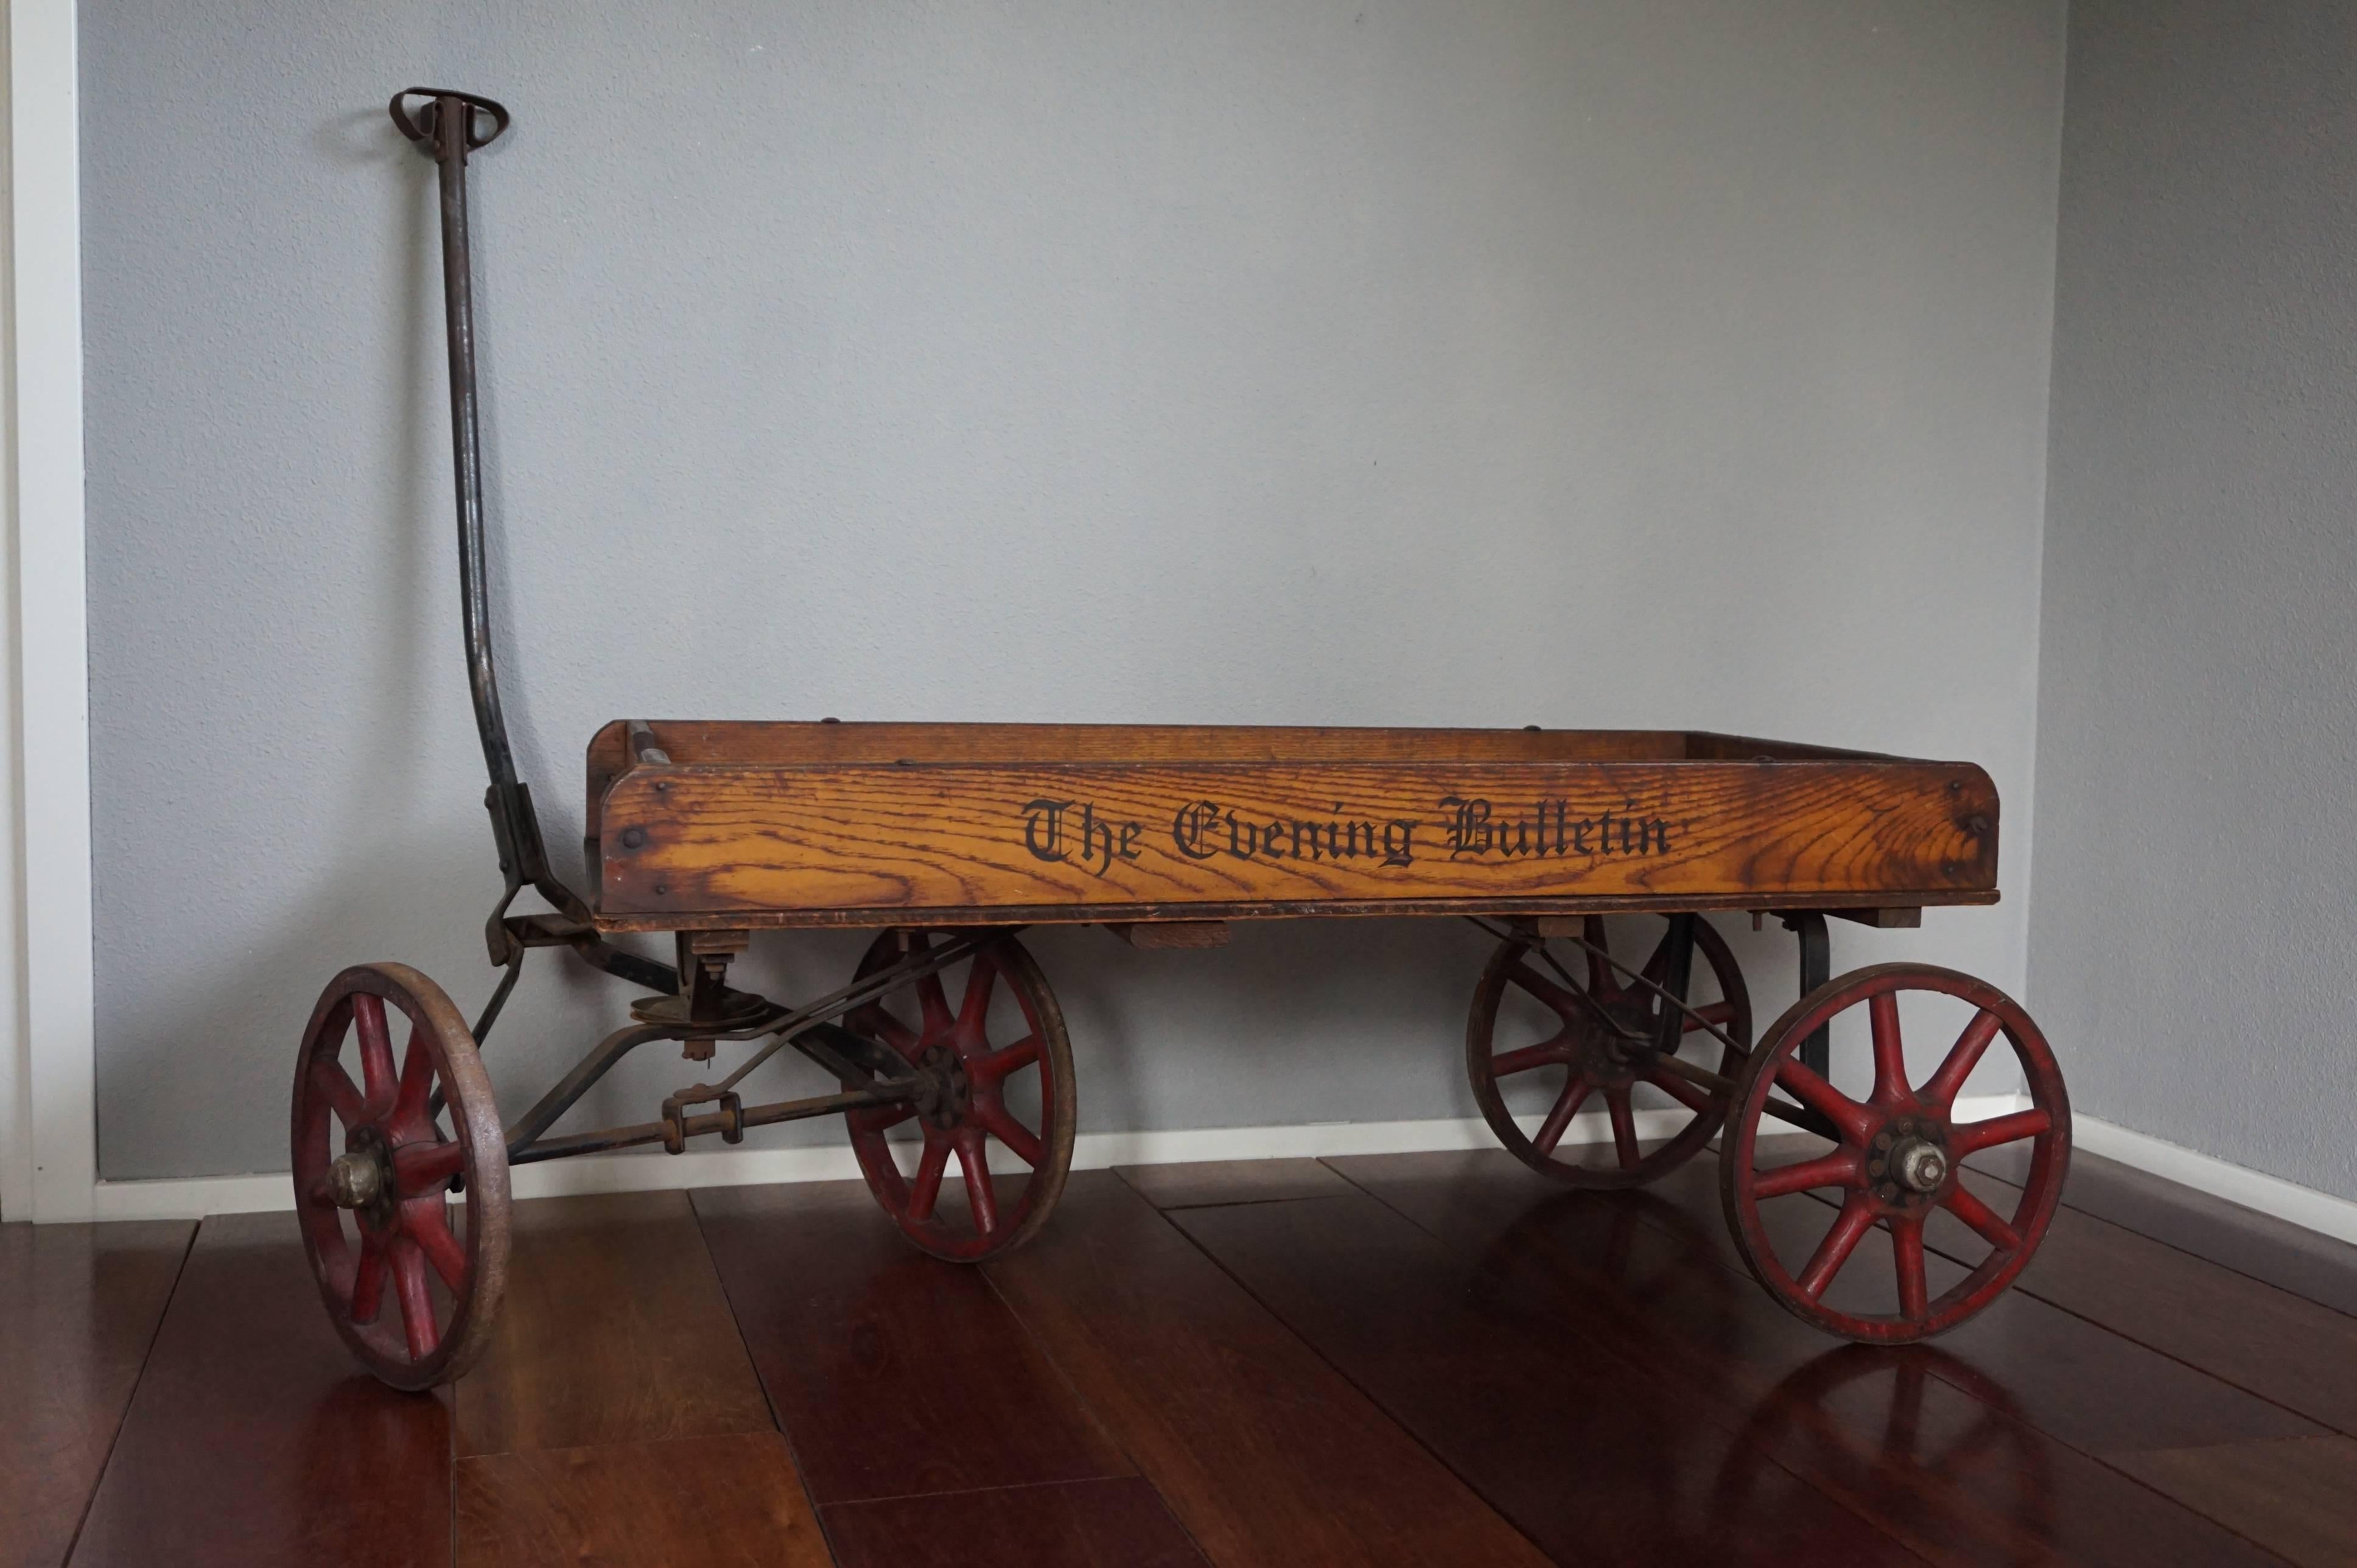 Amazingly authentic, American cart for distributing newspapers.

This could very well be this weeks best antique for interior designers in the Anglo American world. This is a real antique American cart that was used by newspaper boys in the